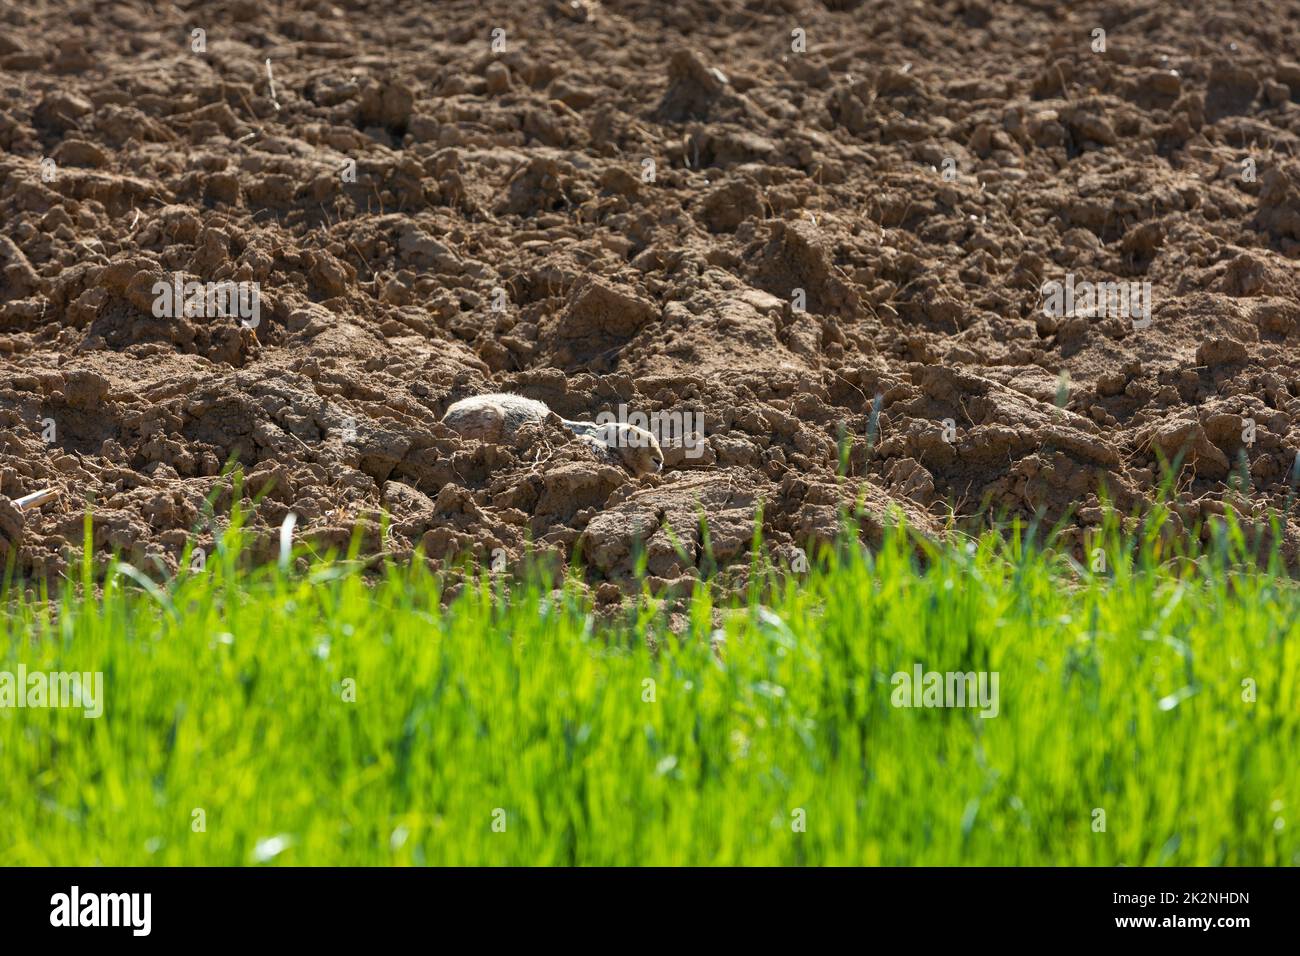 brown hare hiding in the soil of a field Stock Photo